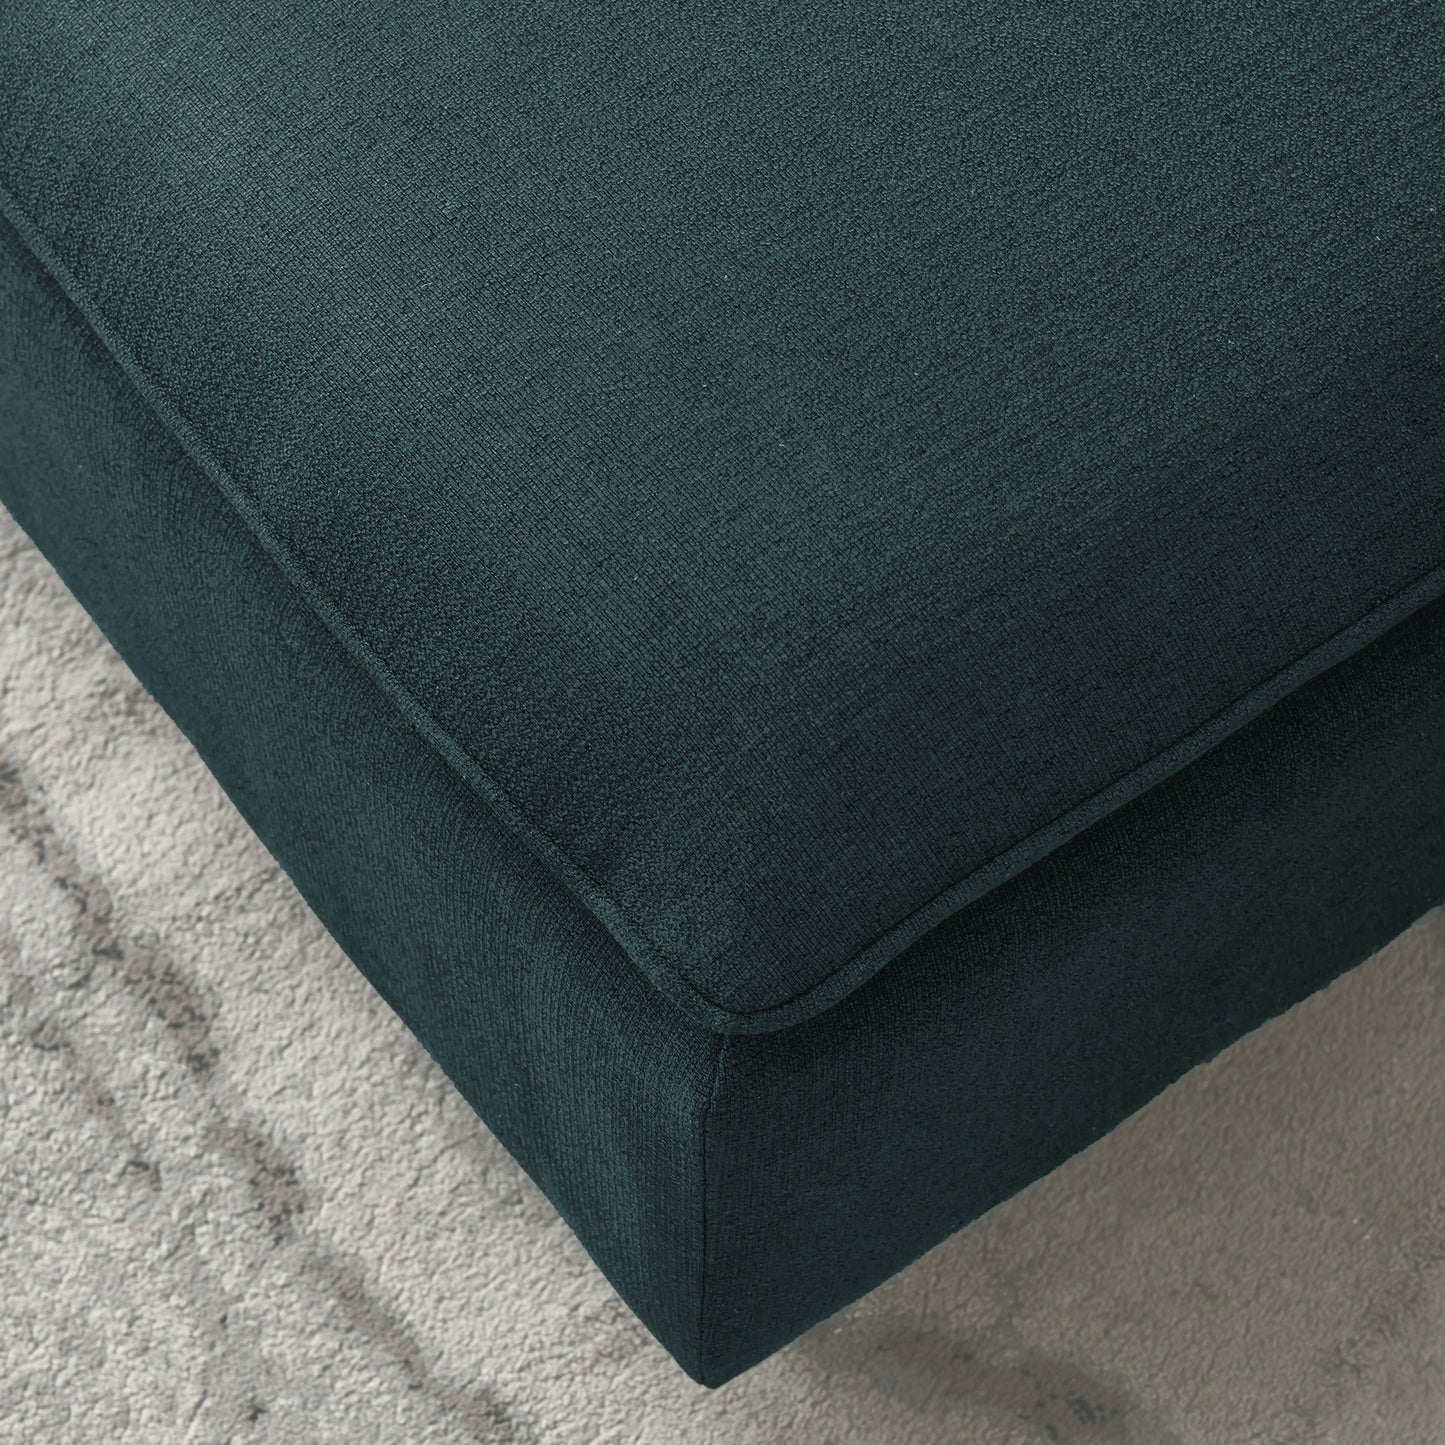 L-Shaped linen sectional sofa with right chaise,Emerald